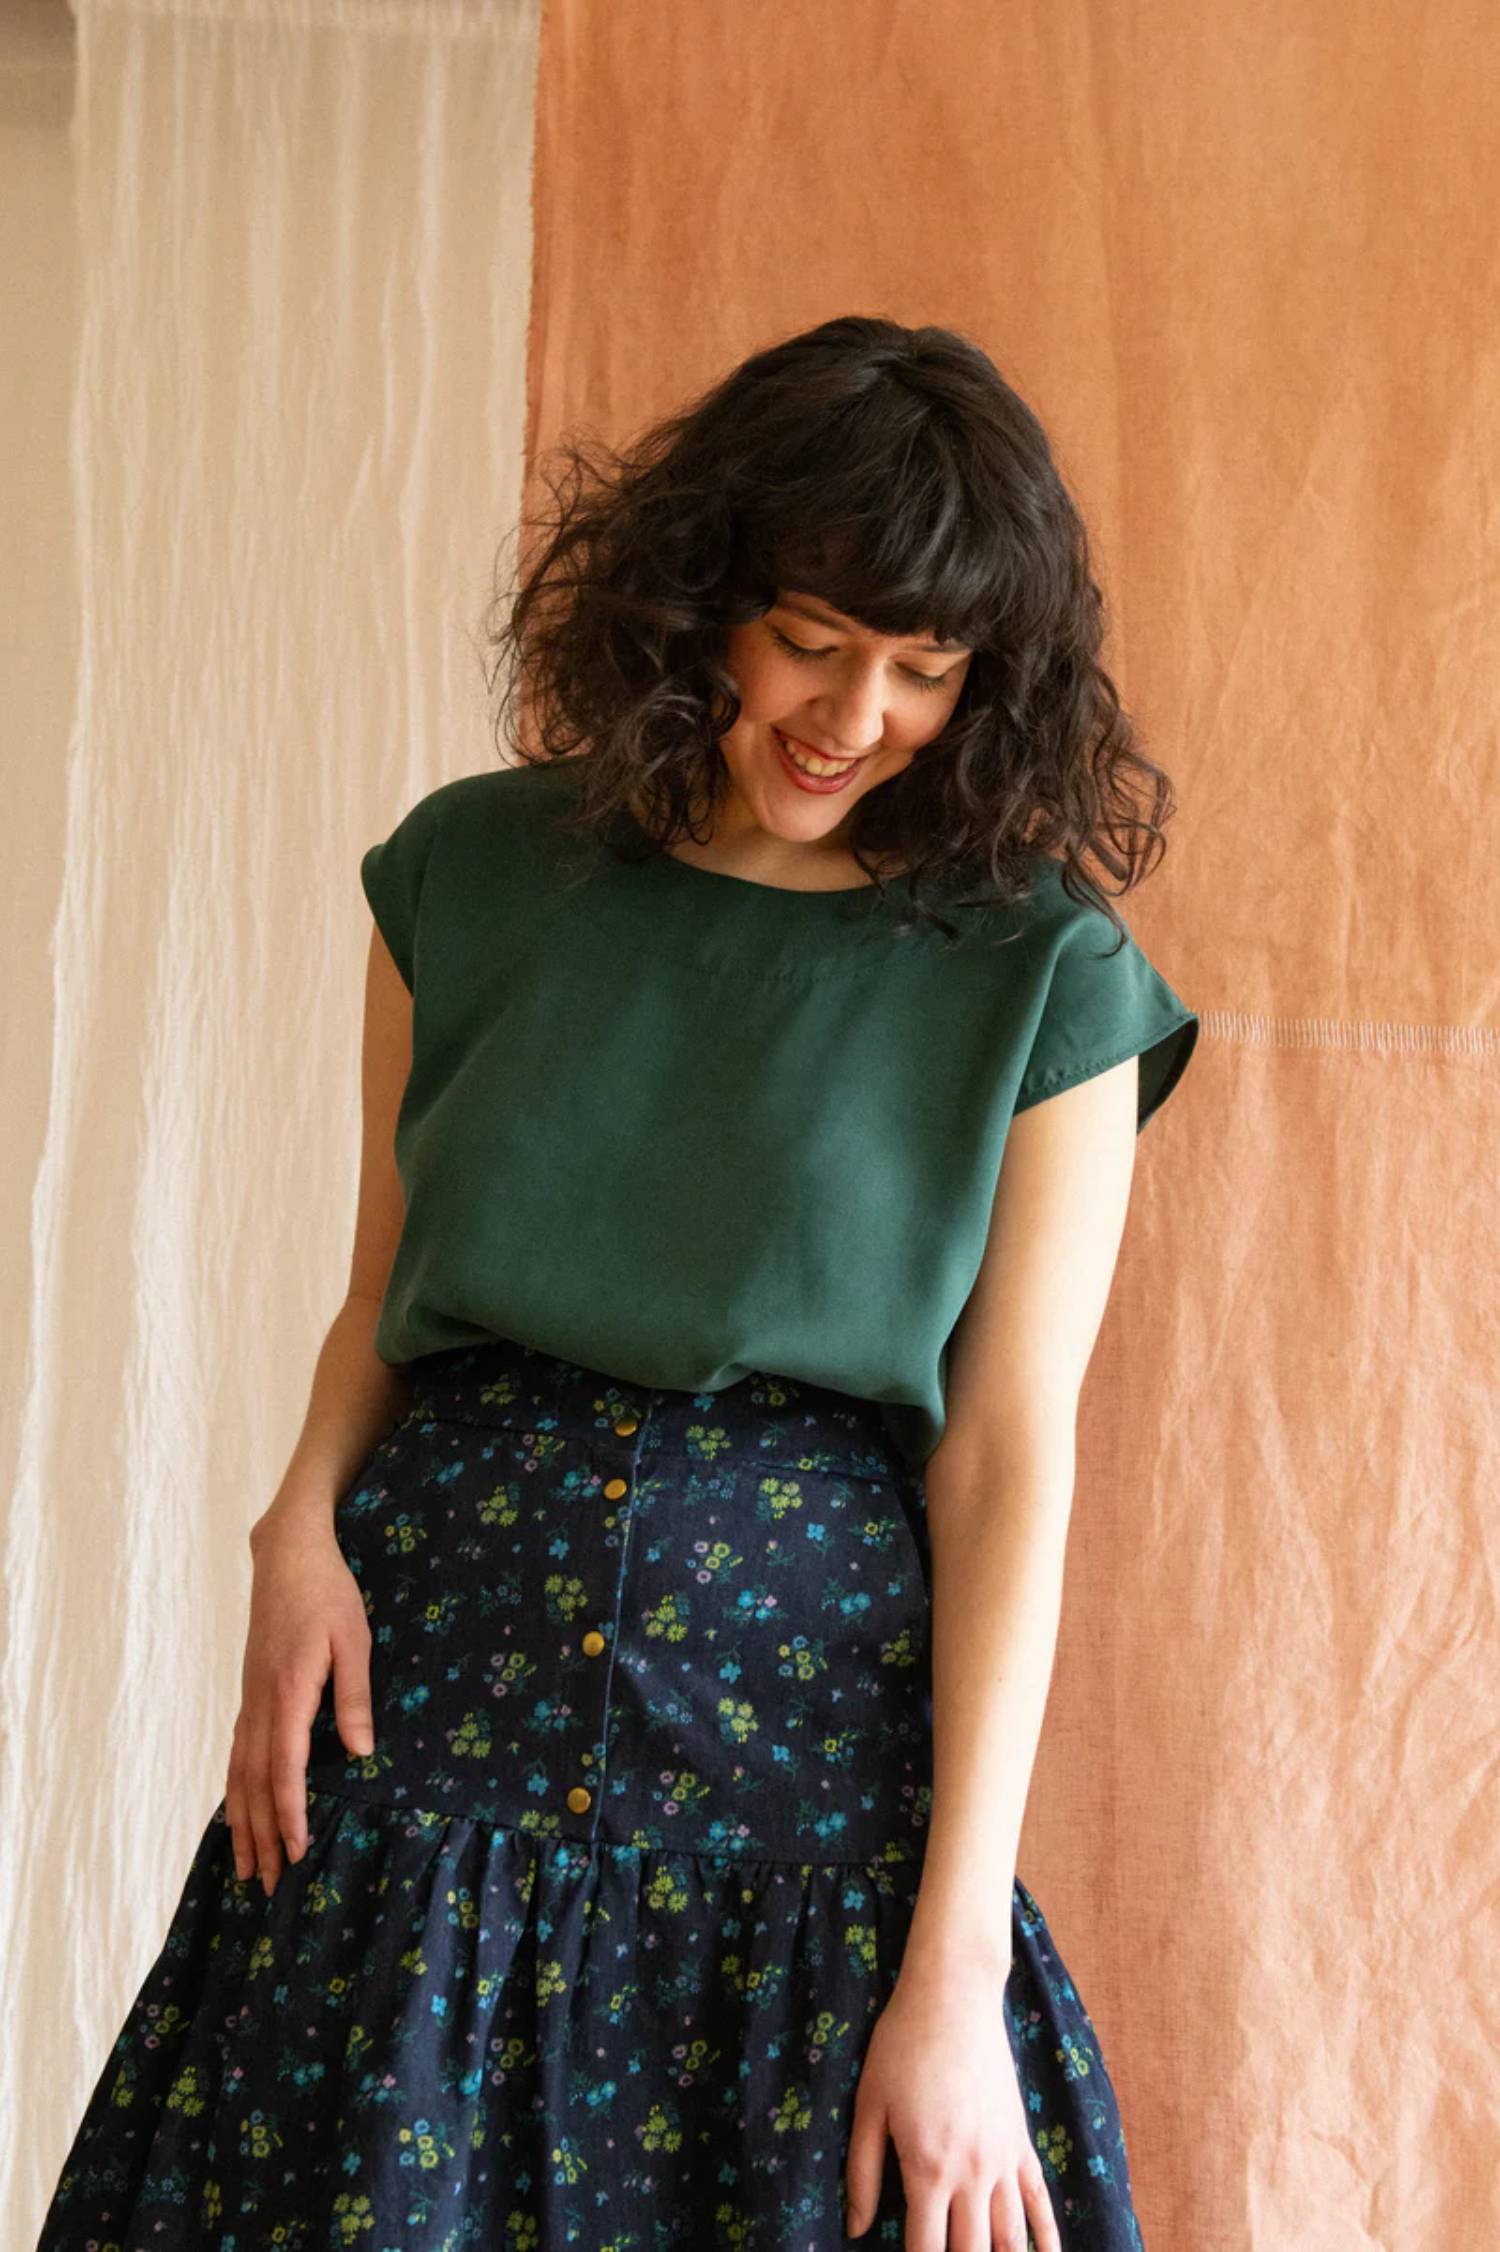 Campanule Skirt by Kazak, Forest Green, midi-length, tiered skirt, elastic at back of waist, brass buttons, two pockets, eco-fabric, organic cotton, OEKO-TEX certified, sizes XS to XL, made in Montreal 